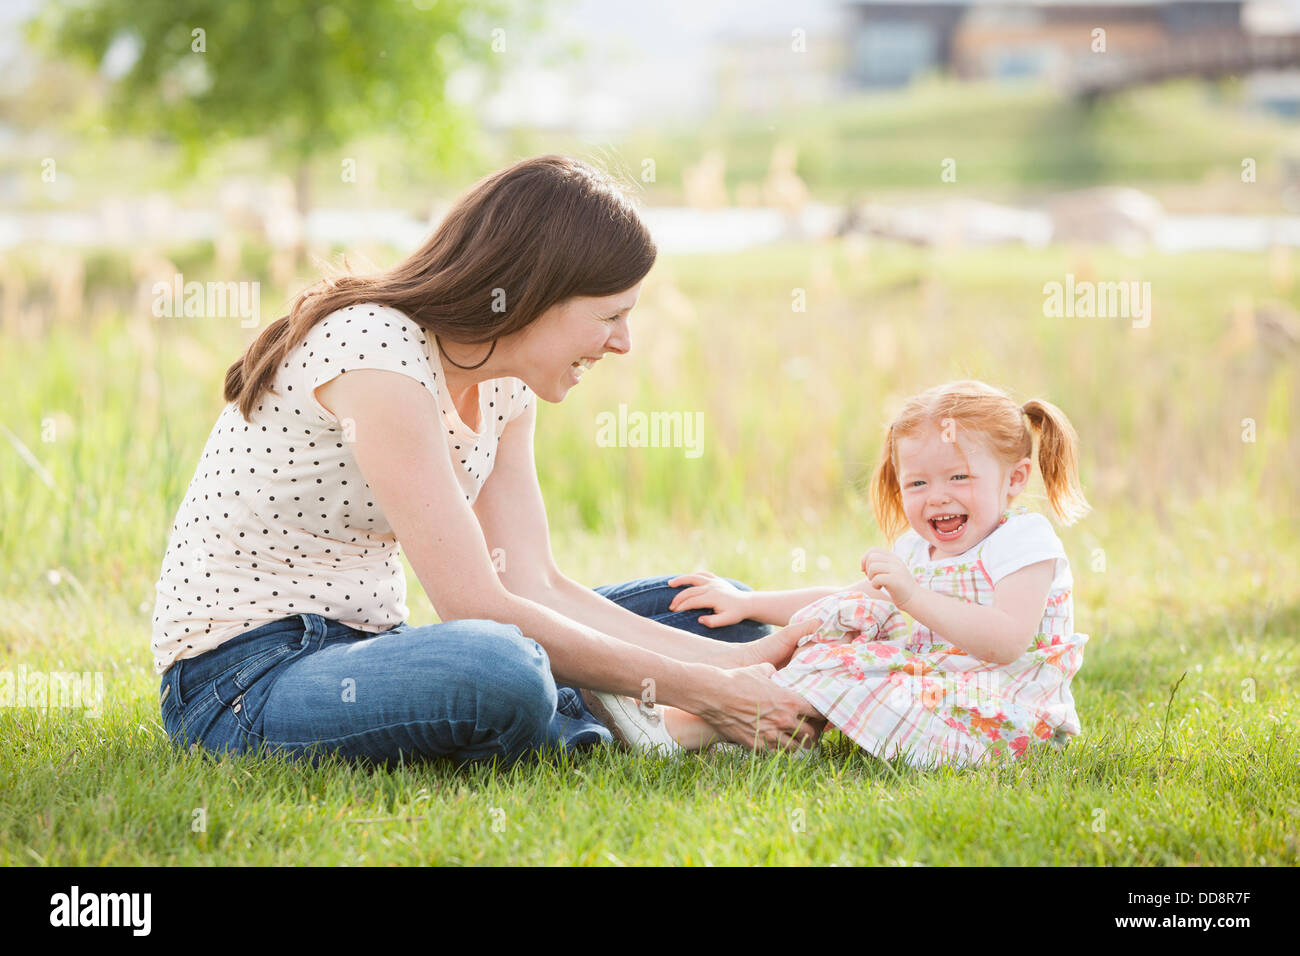 Caucasian mother and daughter playing in grass Stock Photo